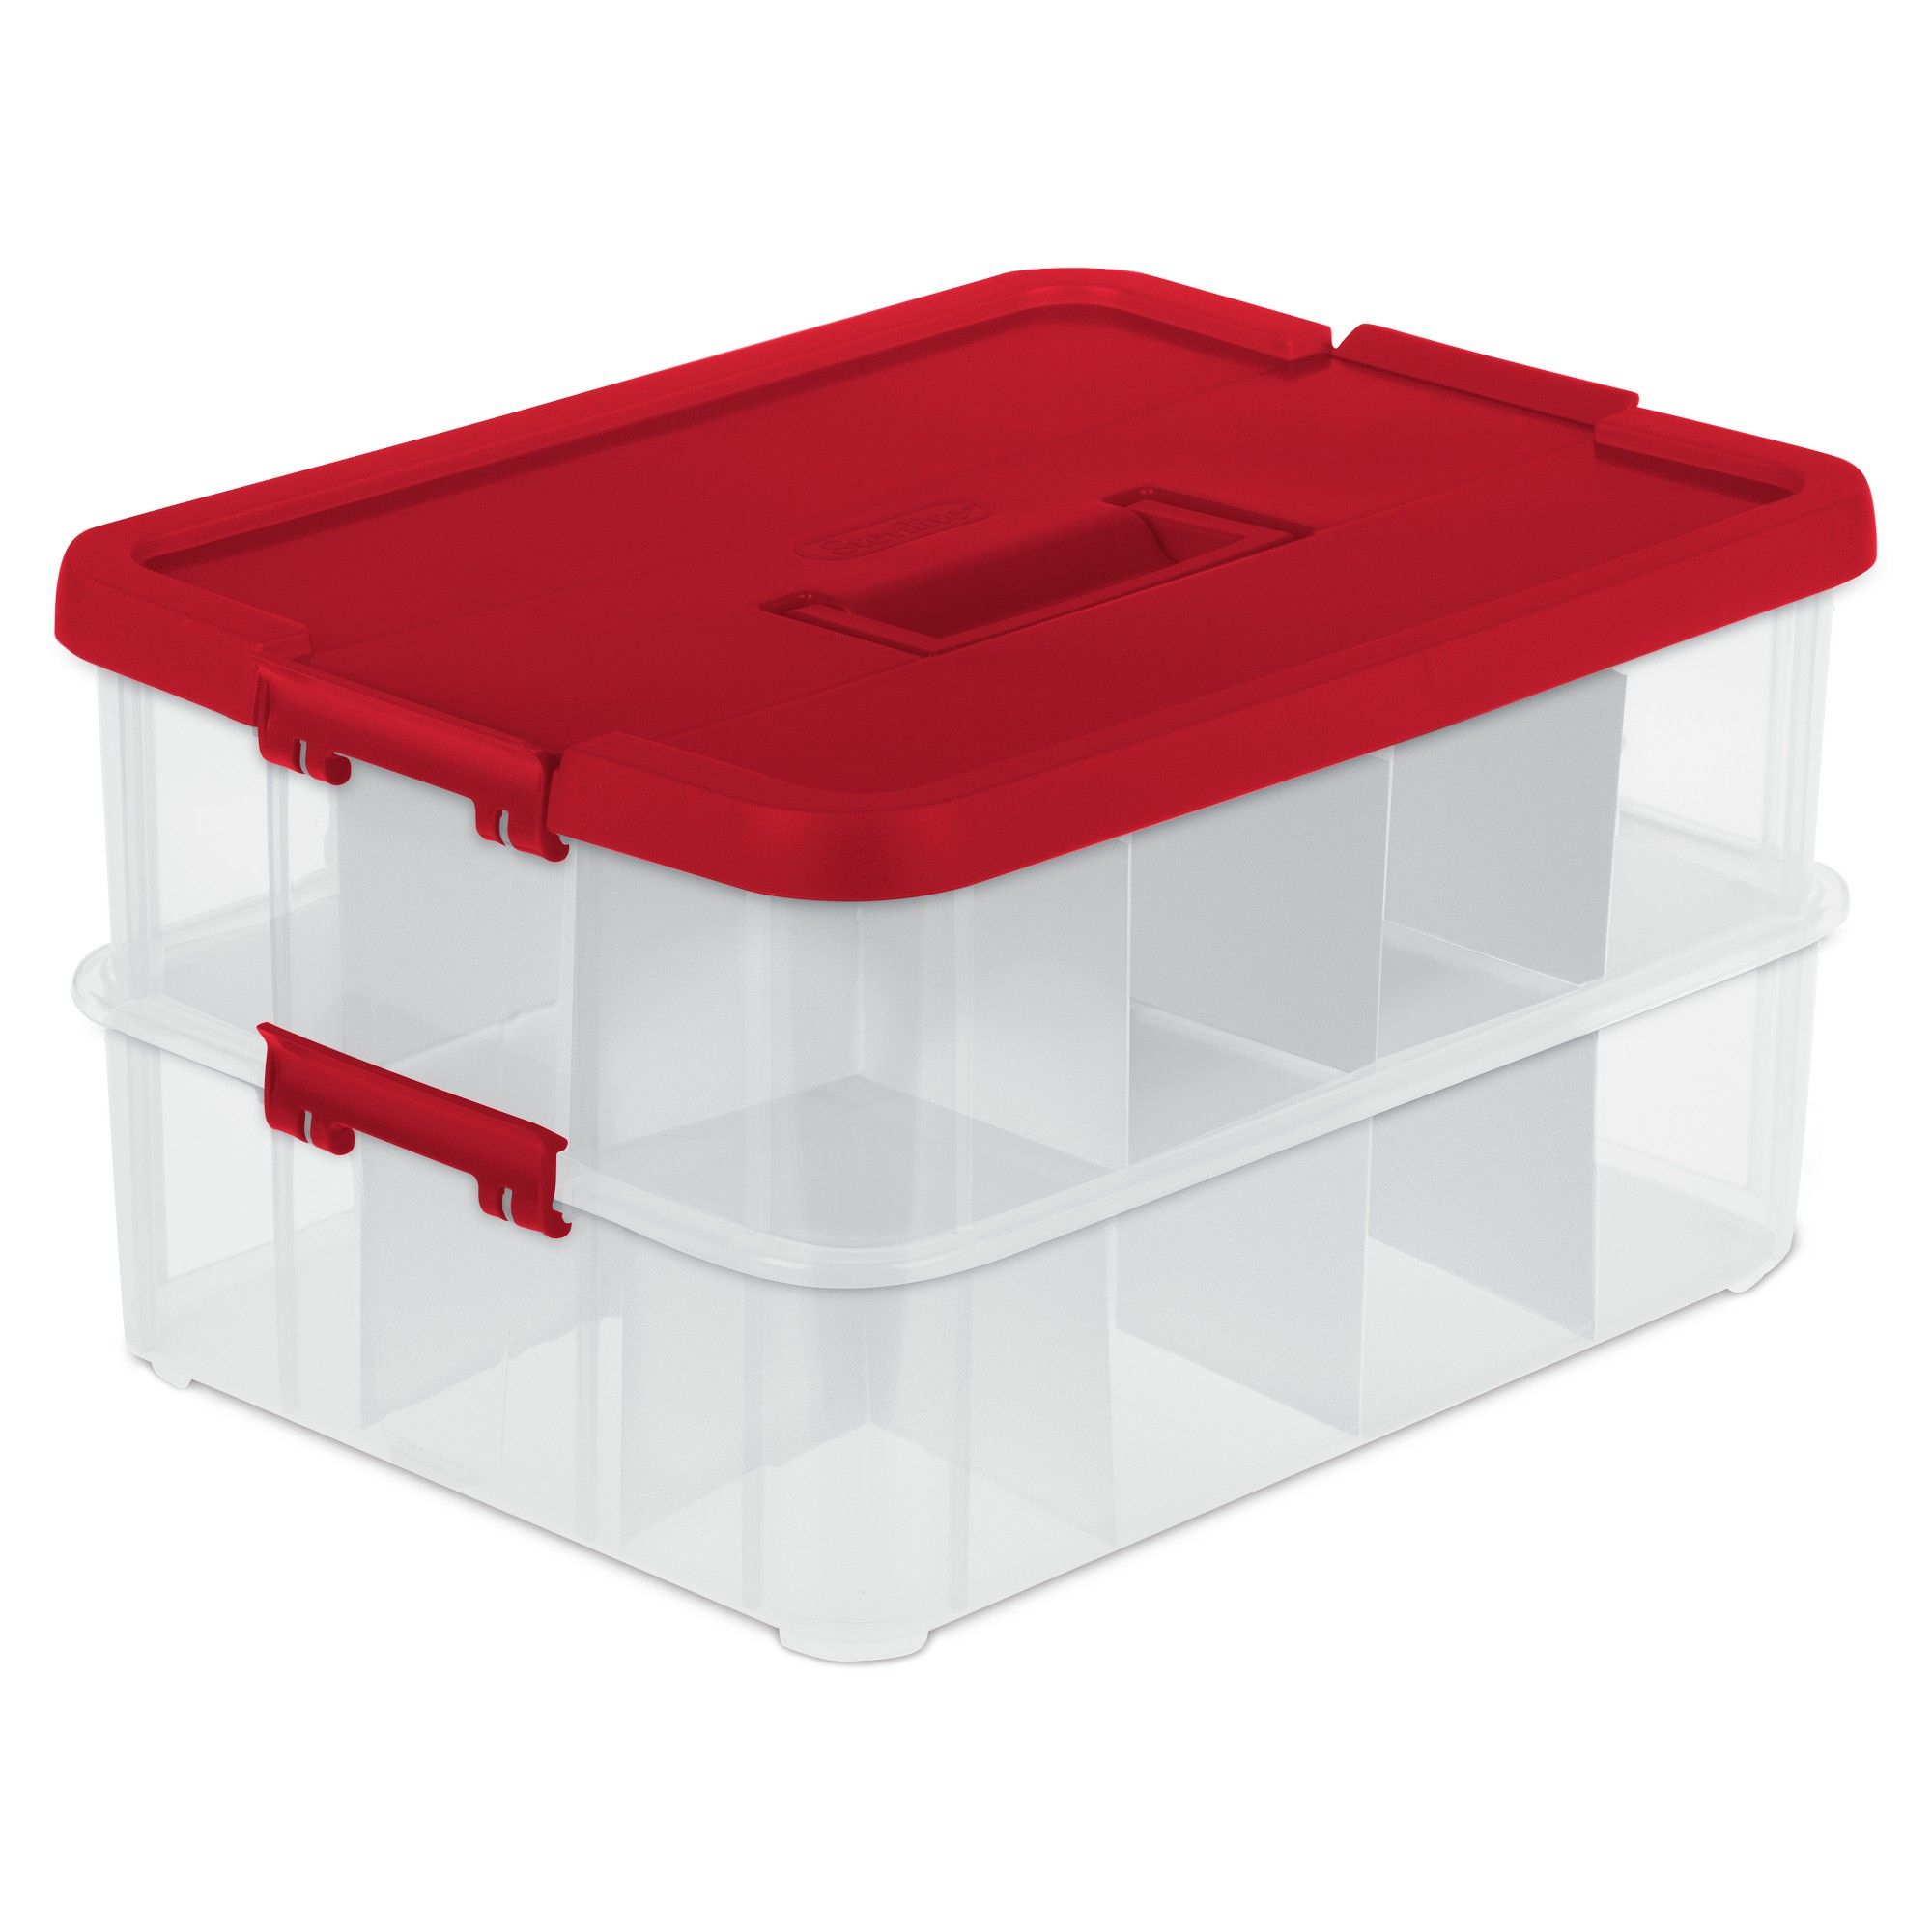 Utility Storage Bins Rocket Red Sterilite Products In 2019 in measurements 2000 X 2000